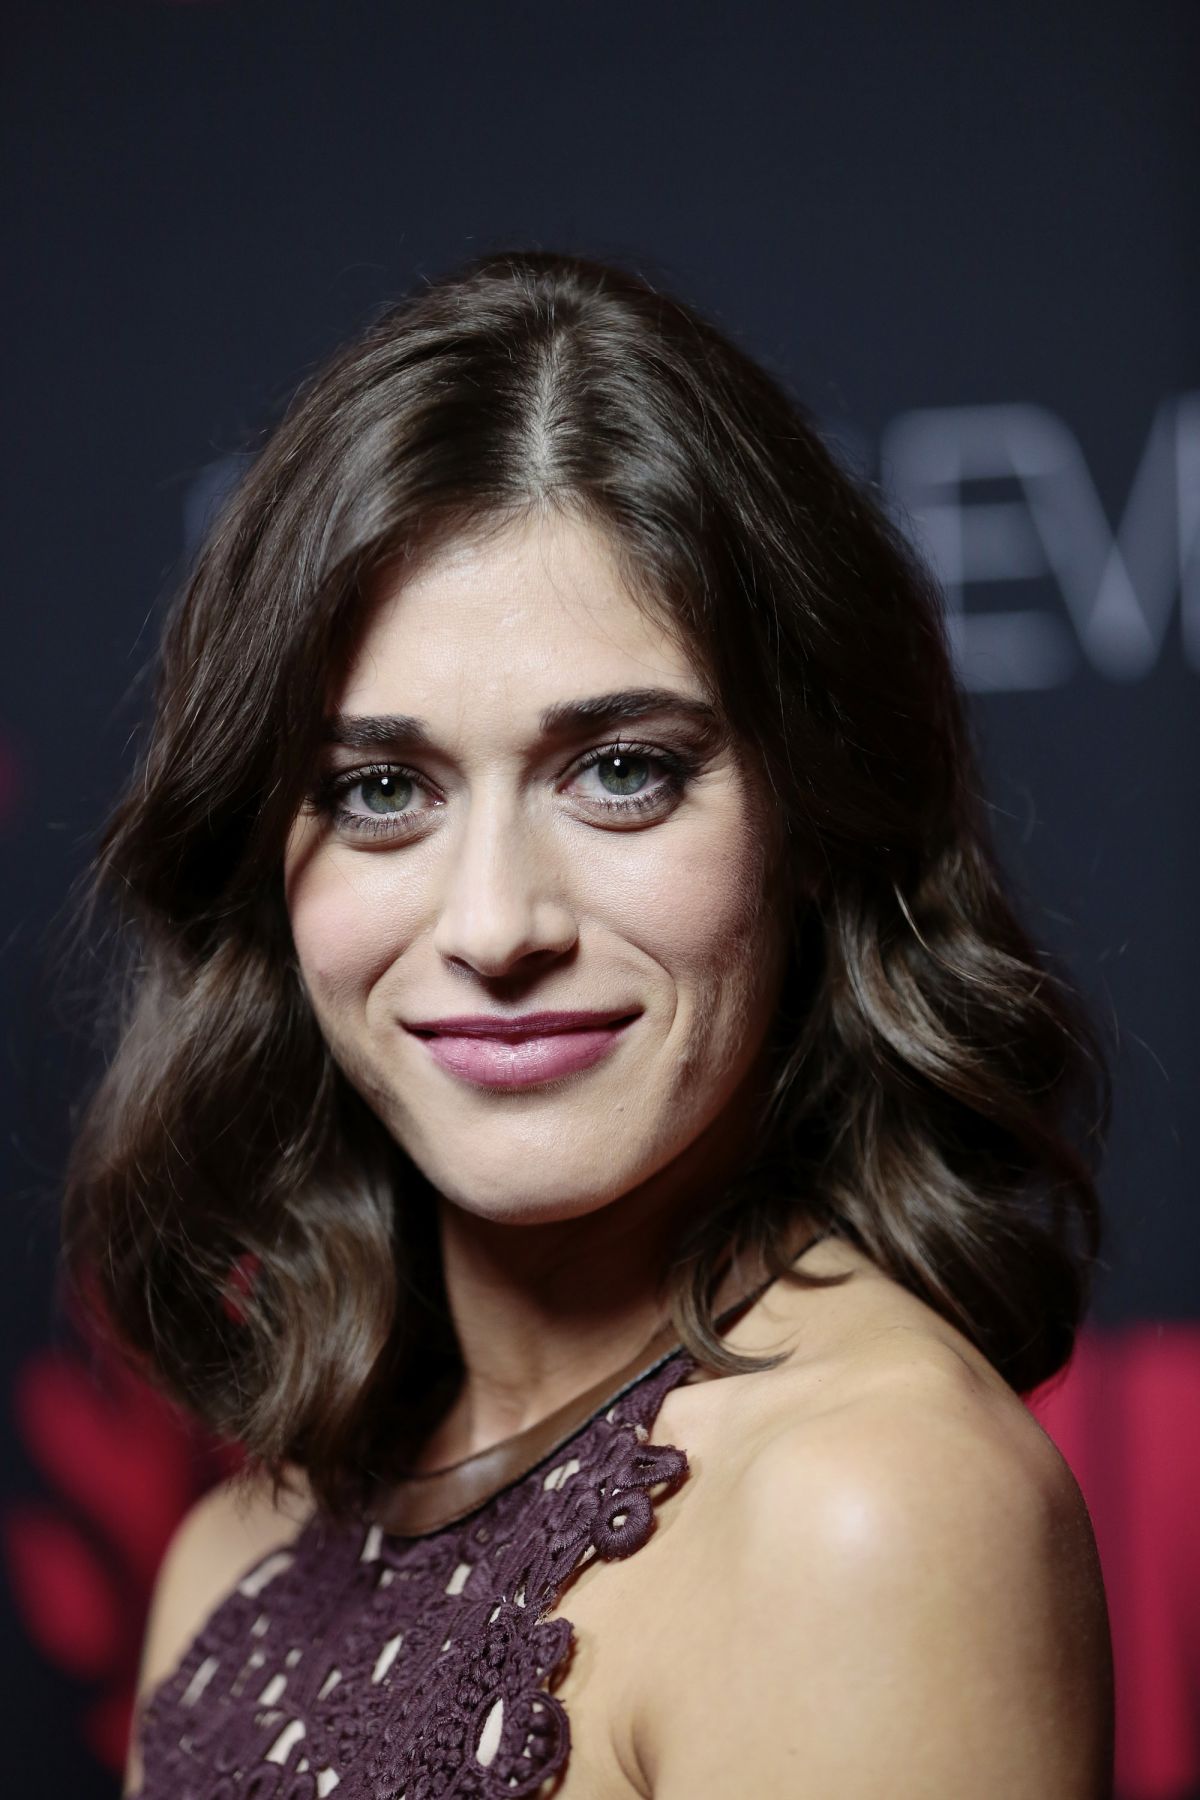 LIZZY CAPLAN at Showtime’s Emmu Eve Soire - HawtCelebs1200 x 1800